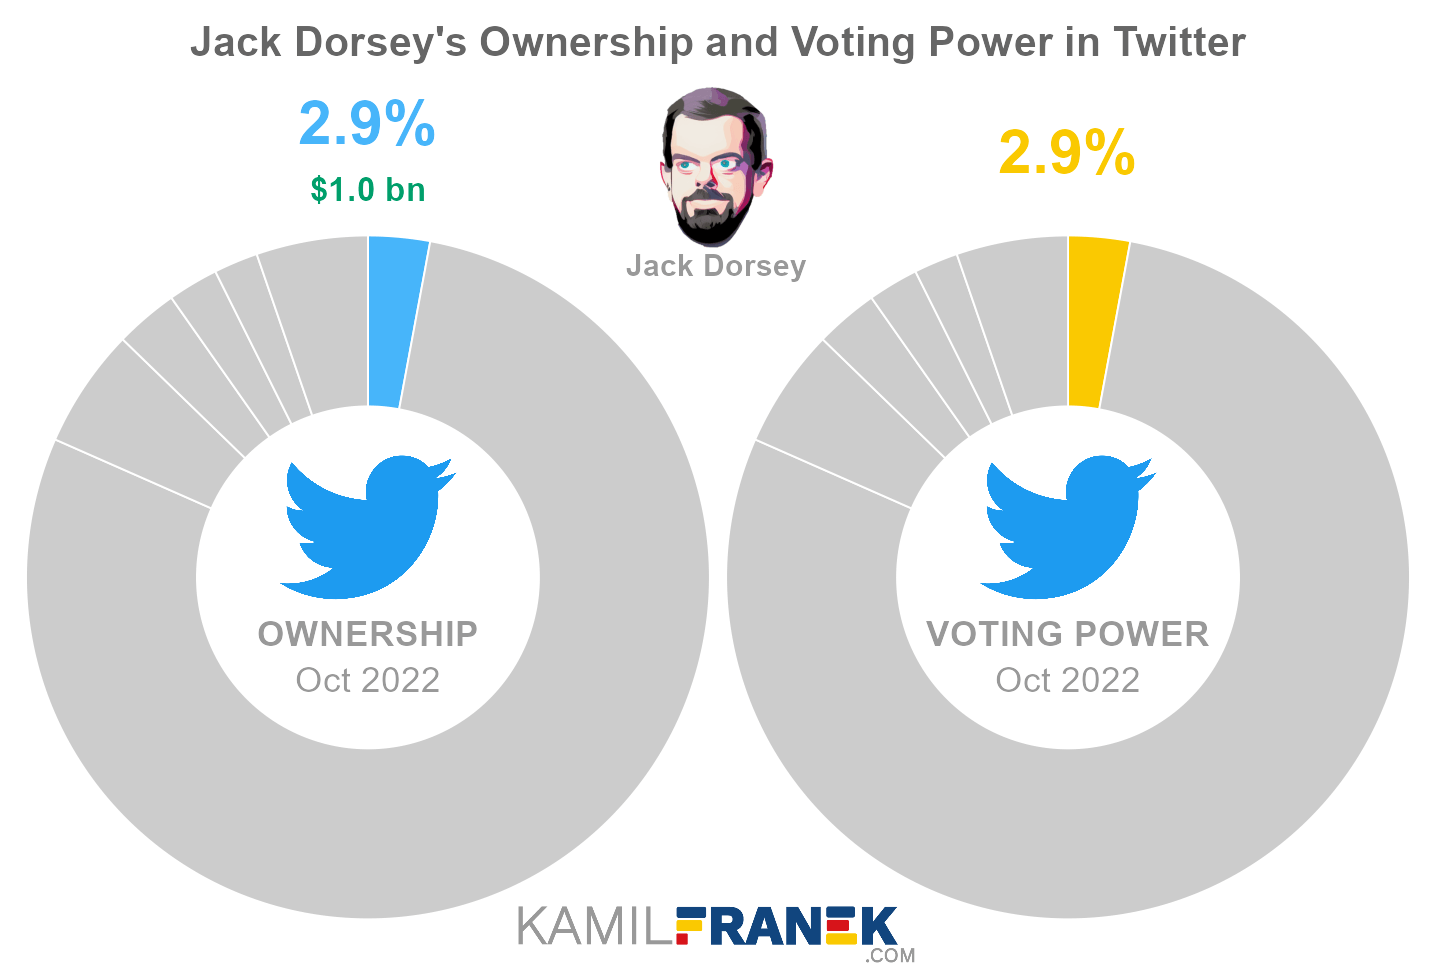 Jack Dorsey's share ownership and voting power in Twitter (chart)